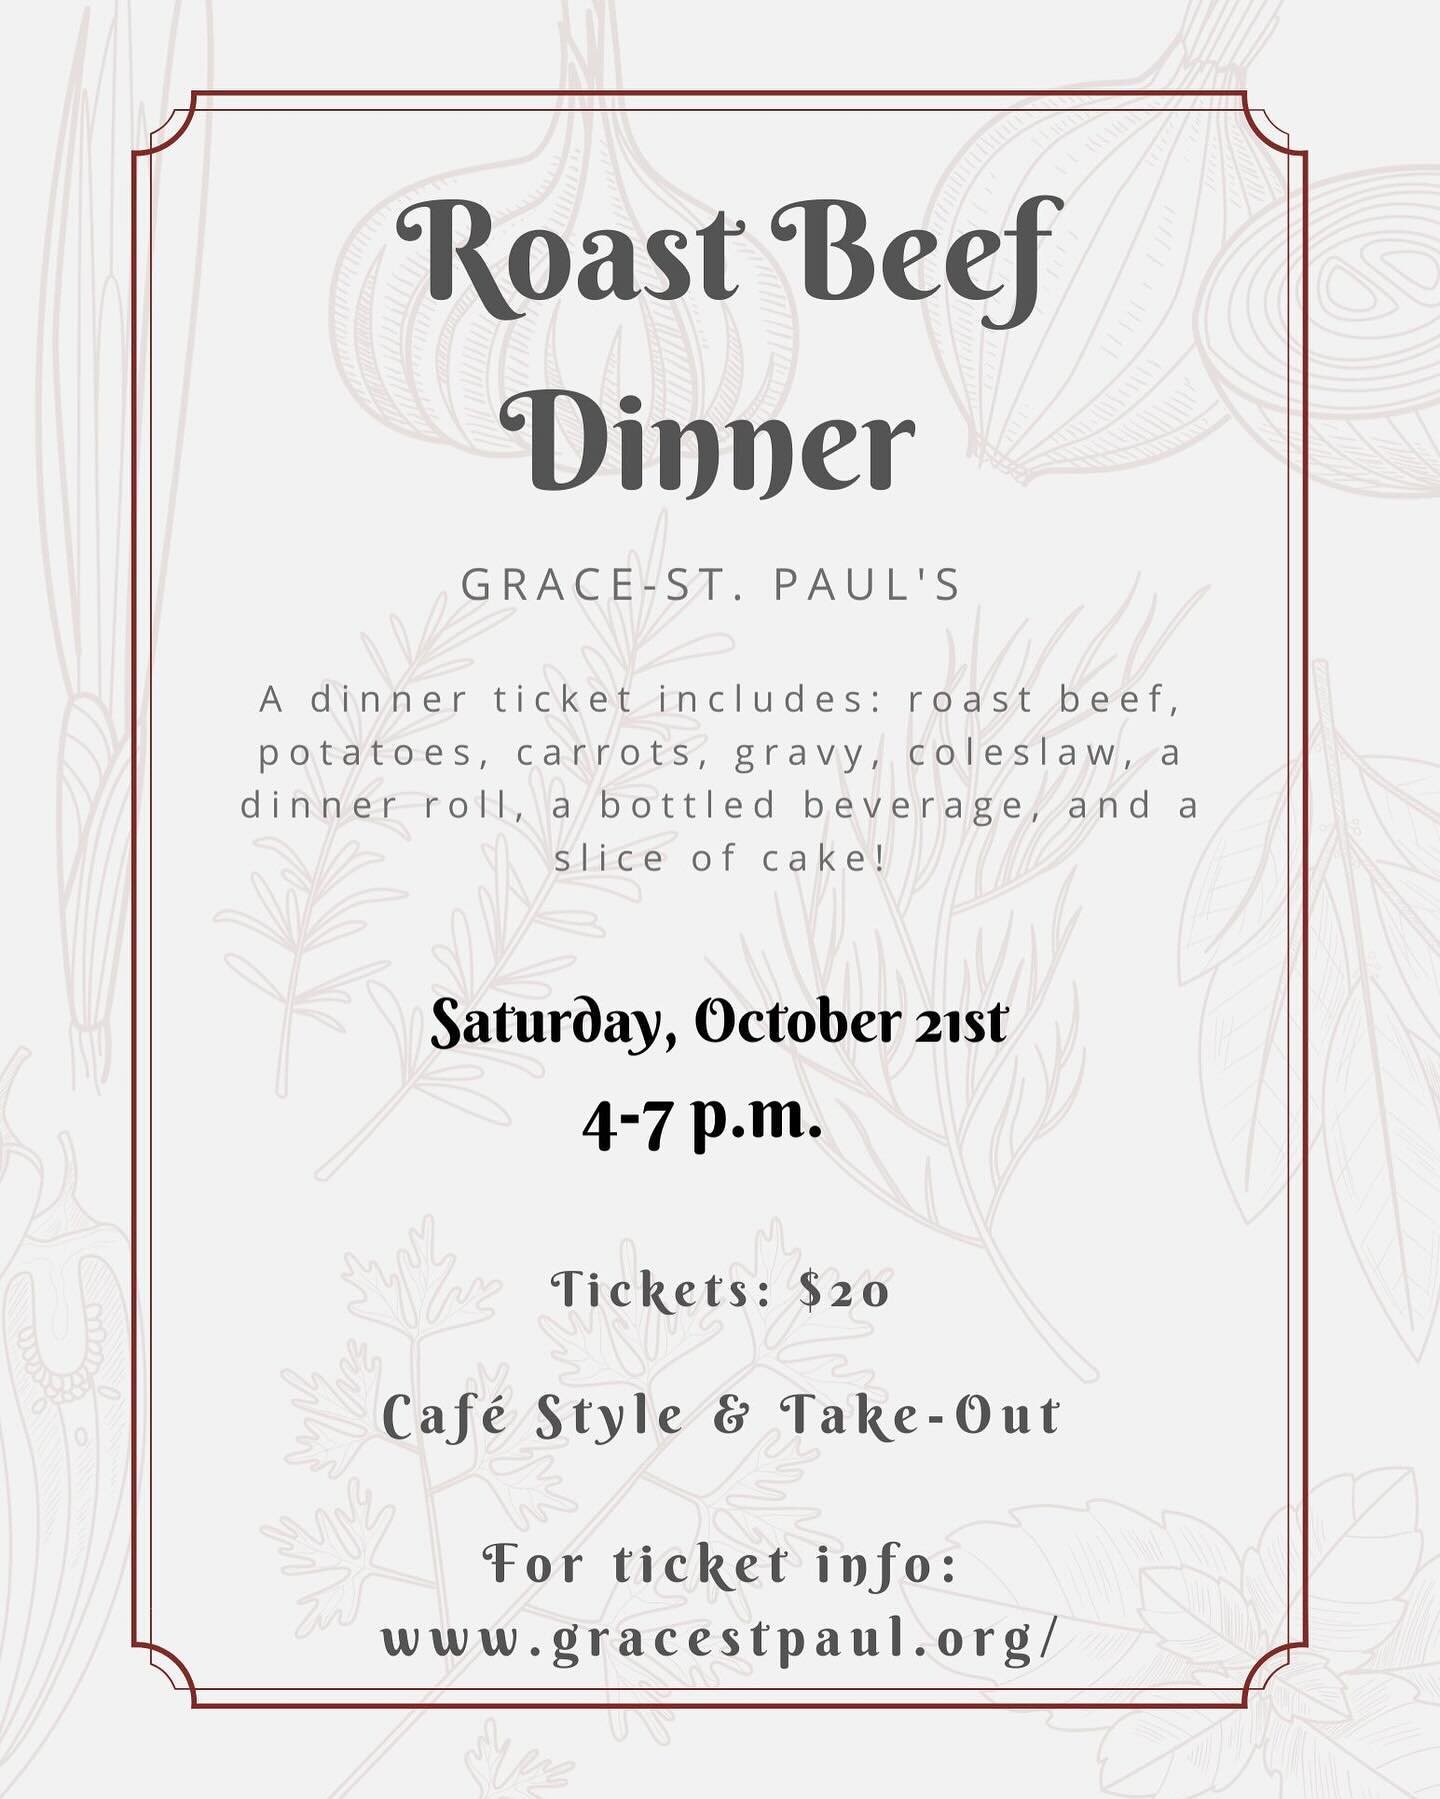 Please join us on Saturday, October 21st from 4-7 pm for a DELICIOUS meal! Tickets are available online, through mail, or at the door. See you there, come hungry! 🍽️